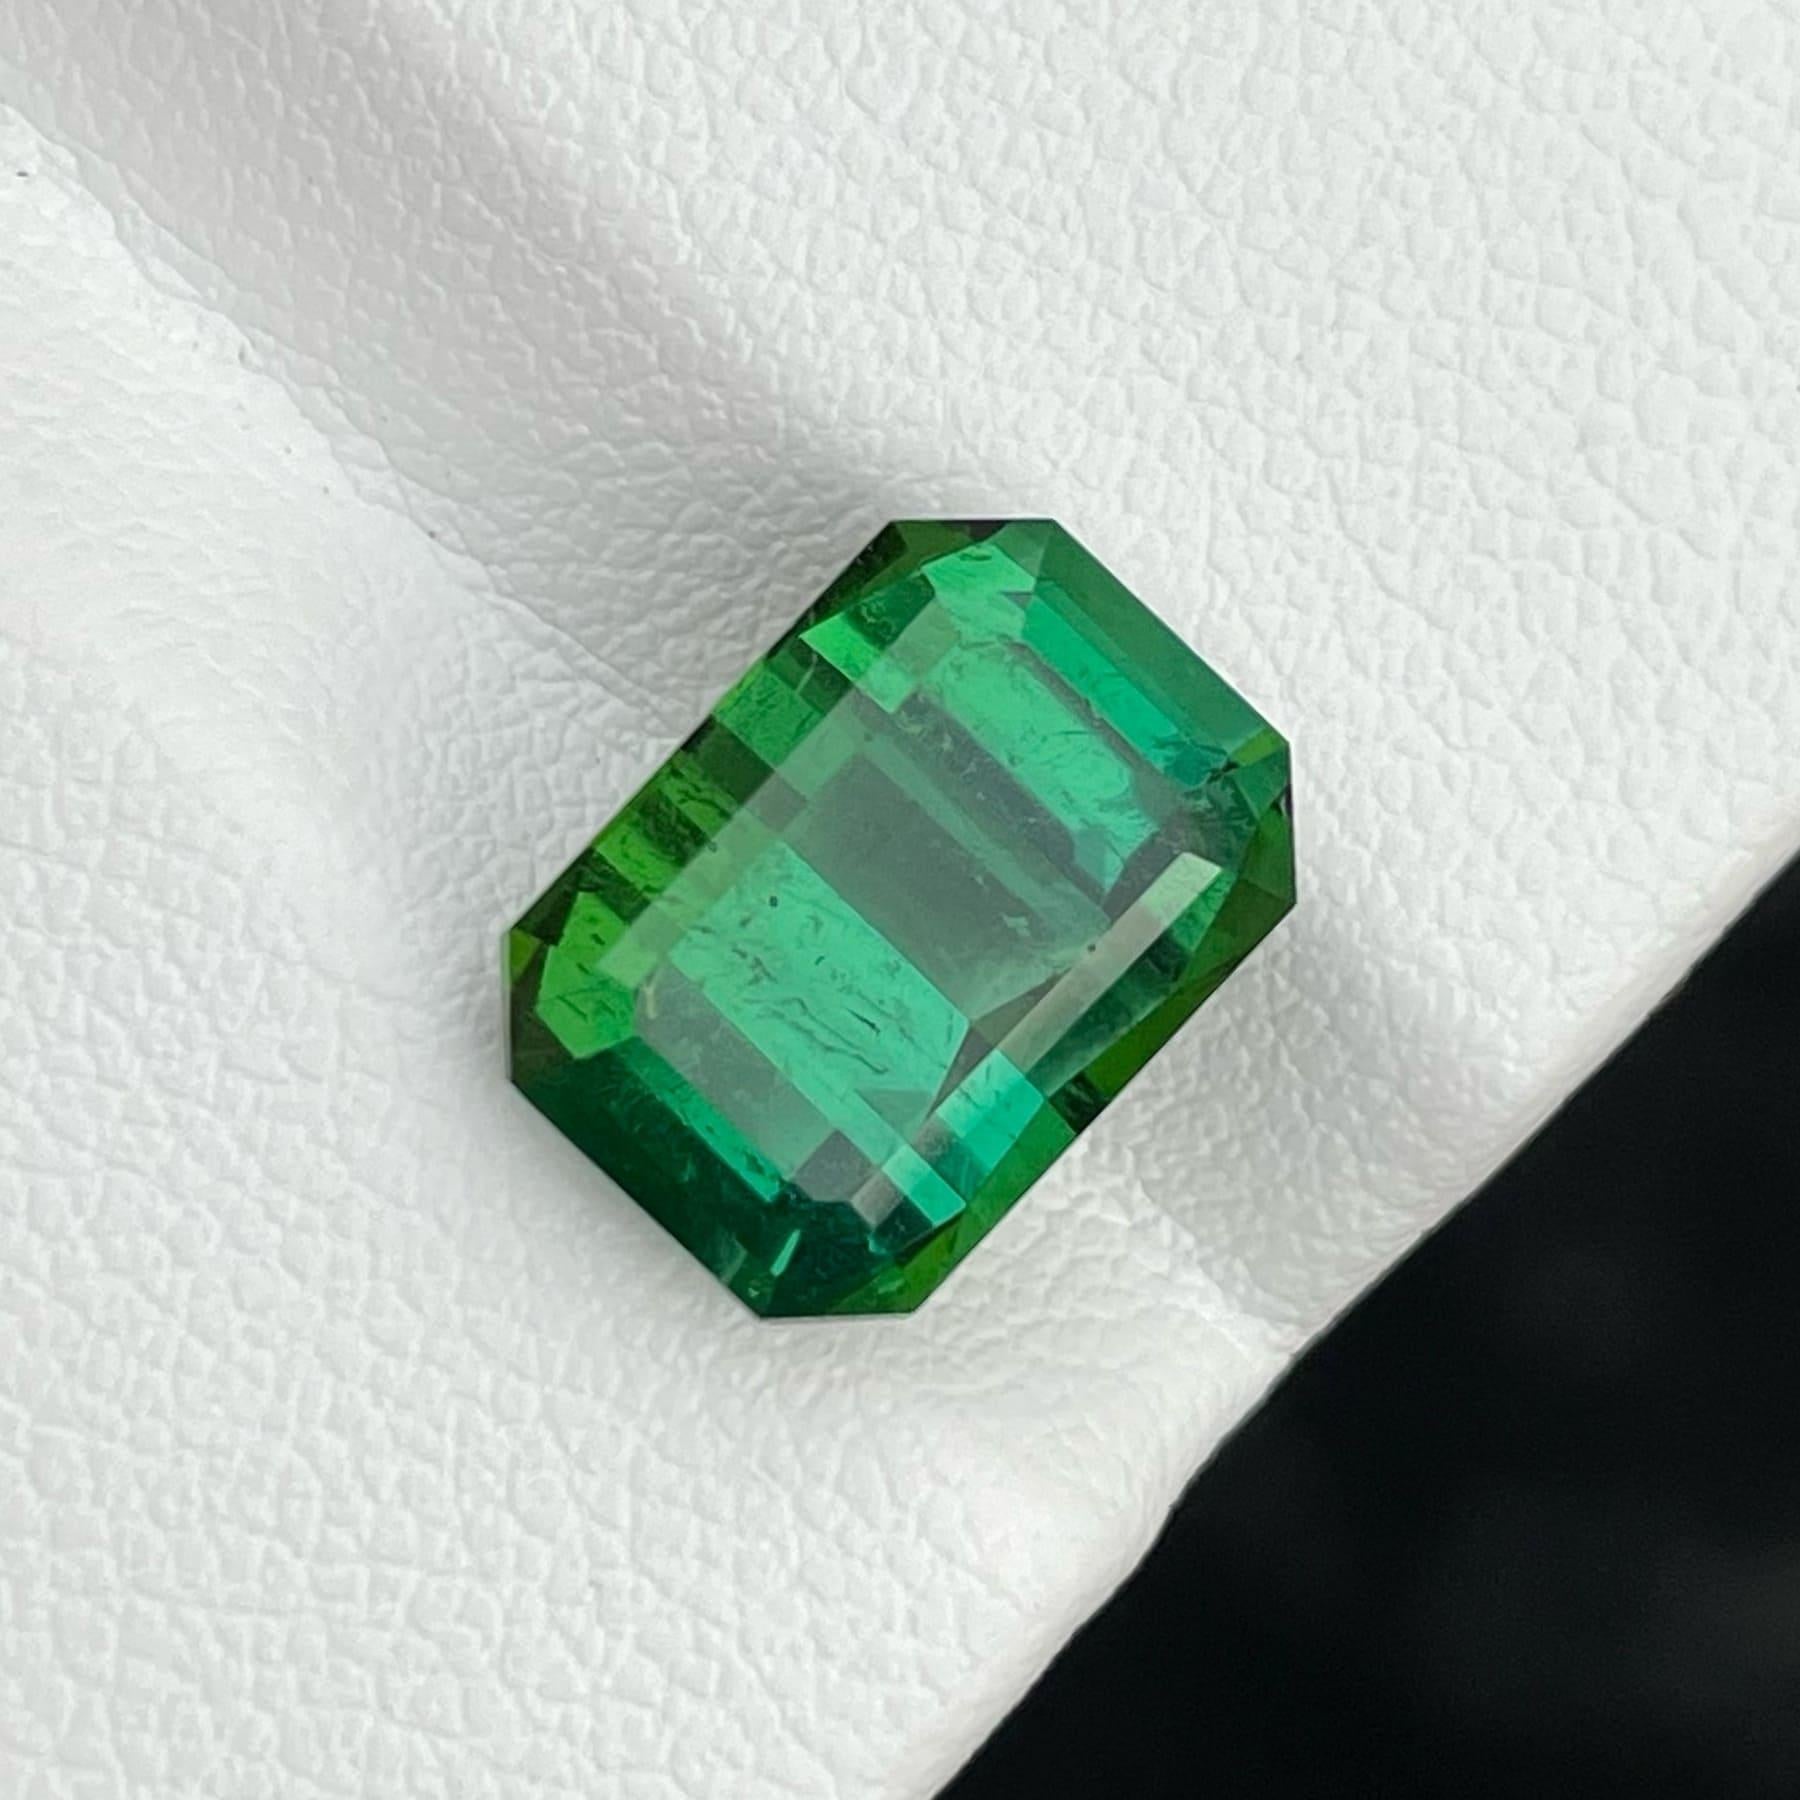 Greenish Blue Natural Tourmaline stone for jewelry, available for sale at wholesale price, Flawless SI Clarity, Emerald Cut, 4.87 carats certified Tourmaline from Africa. tourmaline ring, tourmaline jewelry, tourmaline gemstone

Greenish Blue